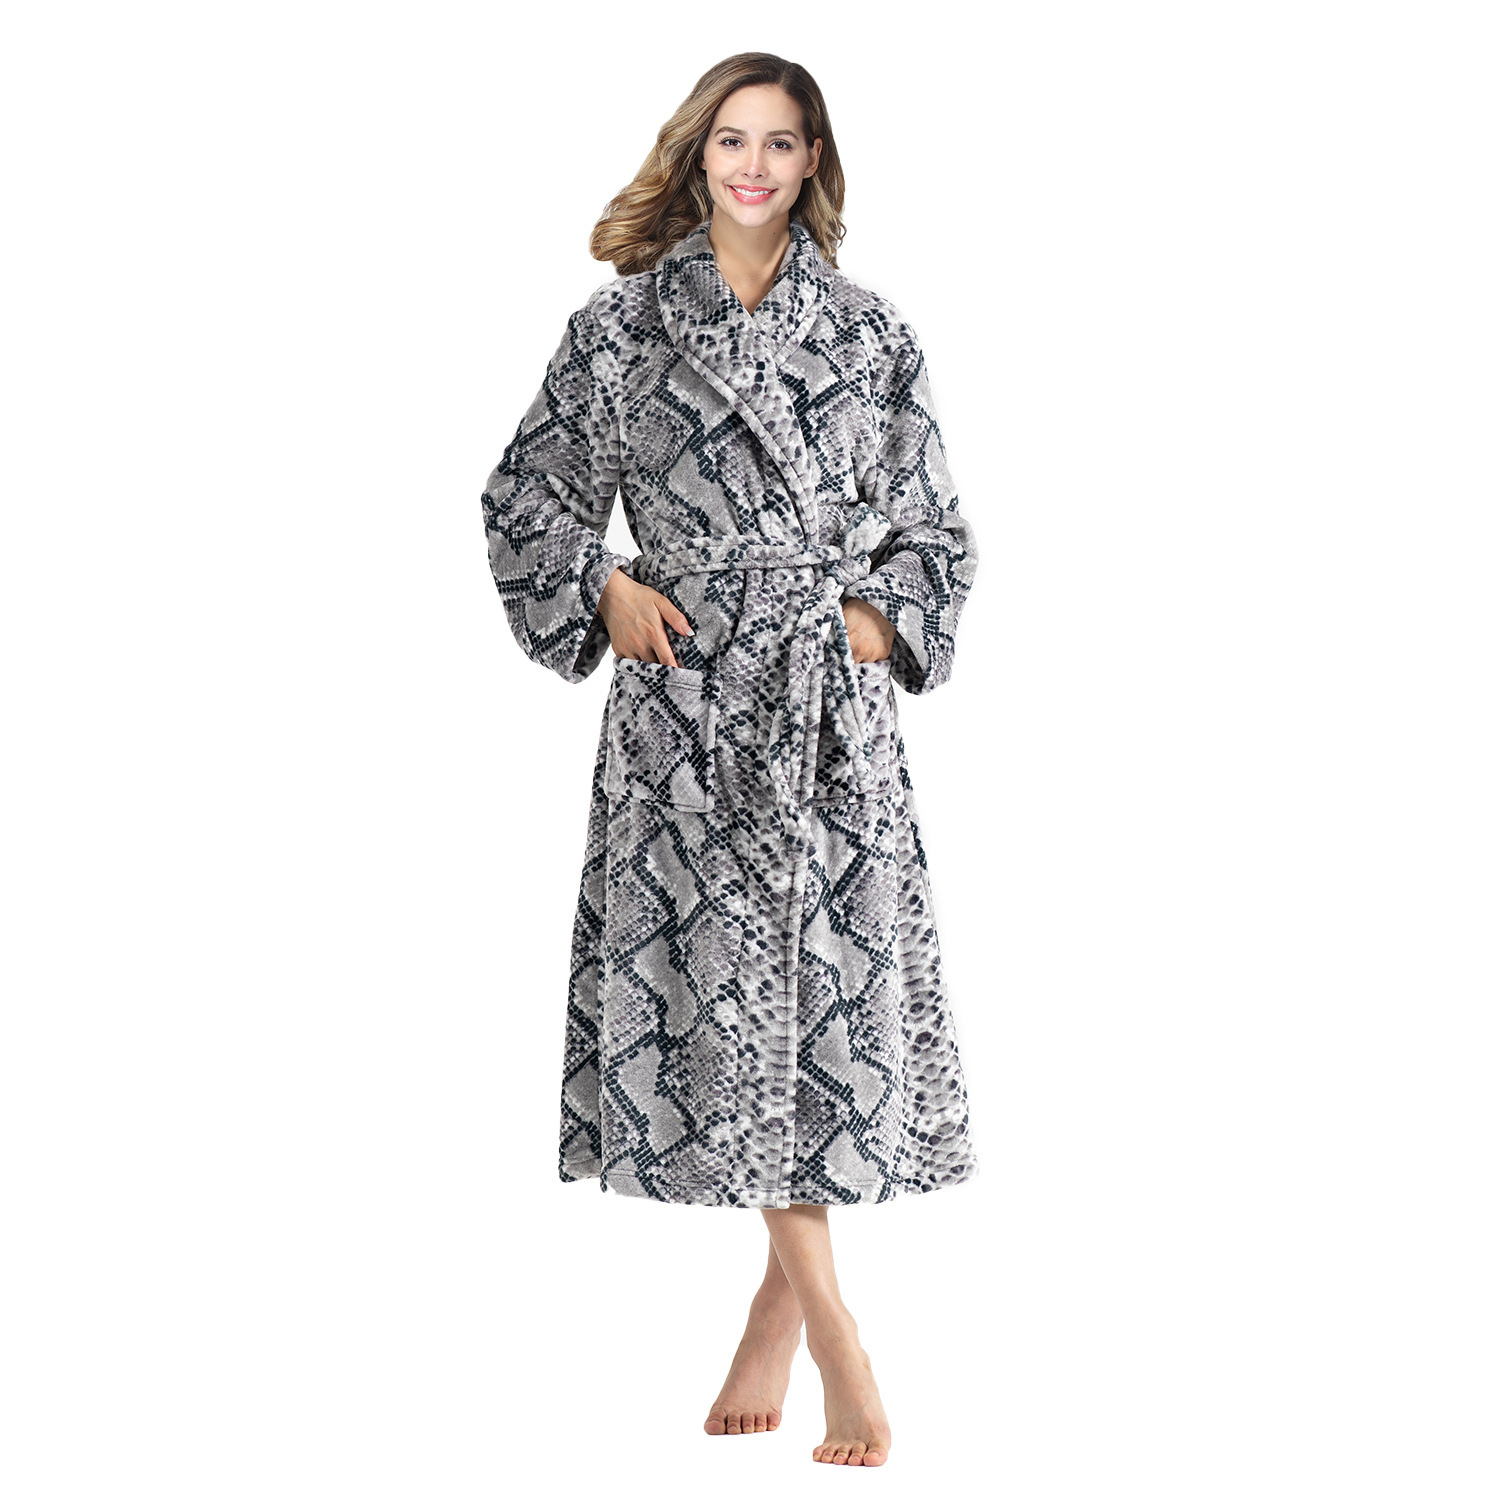 Nightgown Autumn and Winter Women's Flannel Thickened Snake Pattern Rabbit Pattern Lapel High-End Can Be Worn outside Sexy Bathrobe